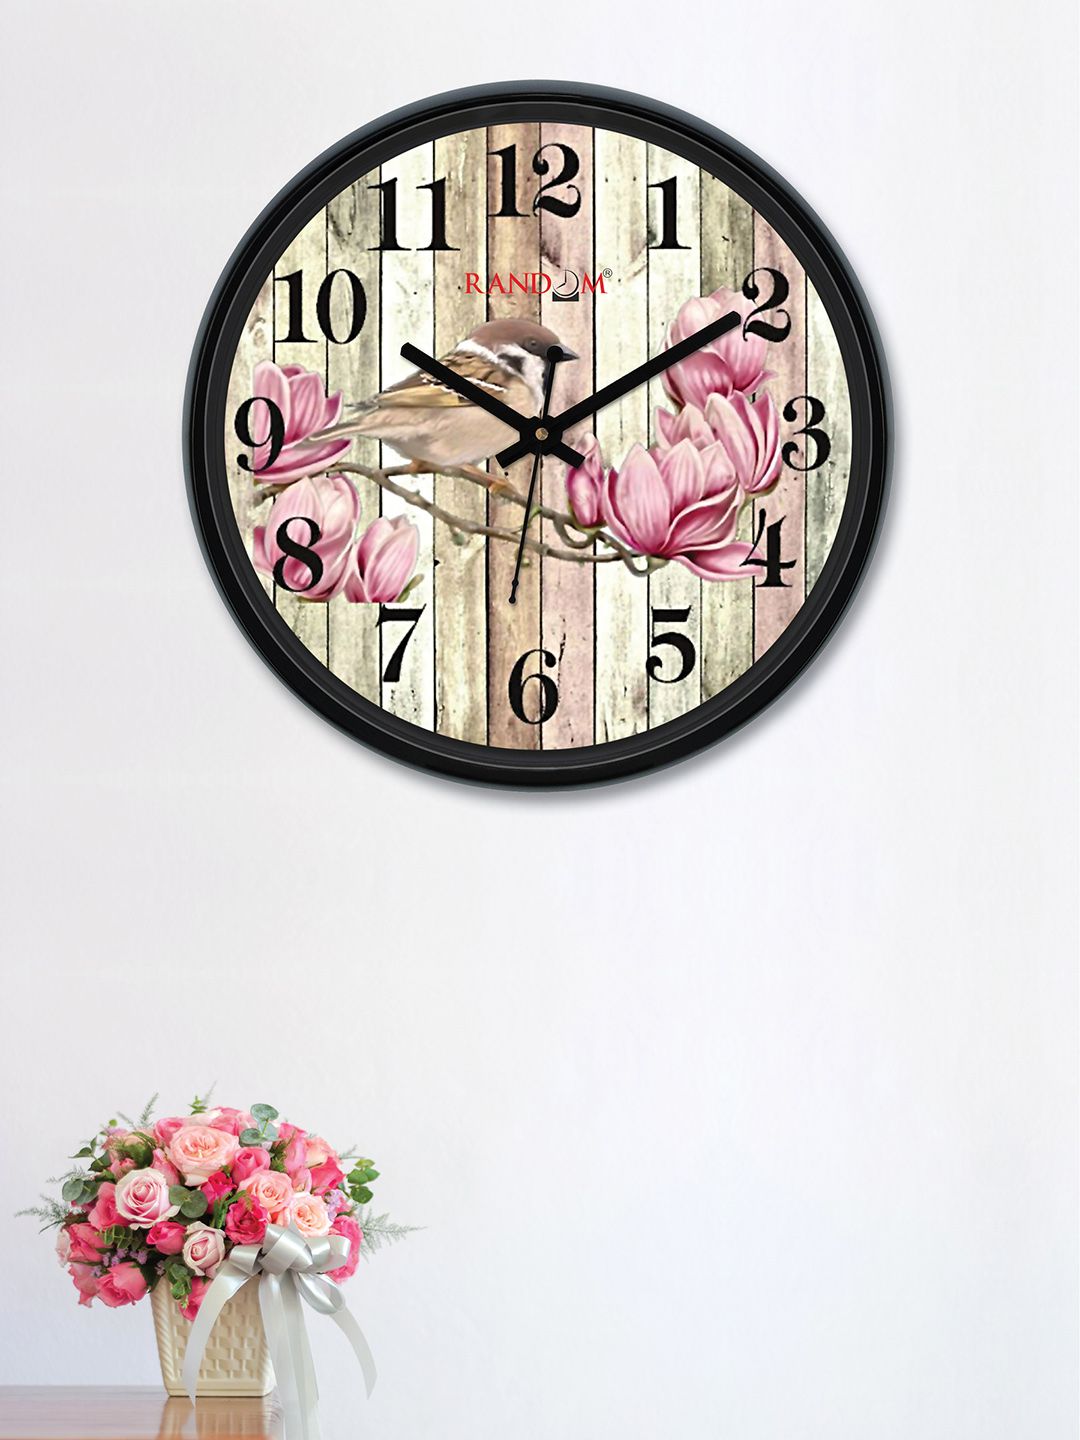 RANDOM Beige & Pink Round Solid 30 cm Analogue Wall Clock Price in India